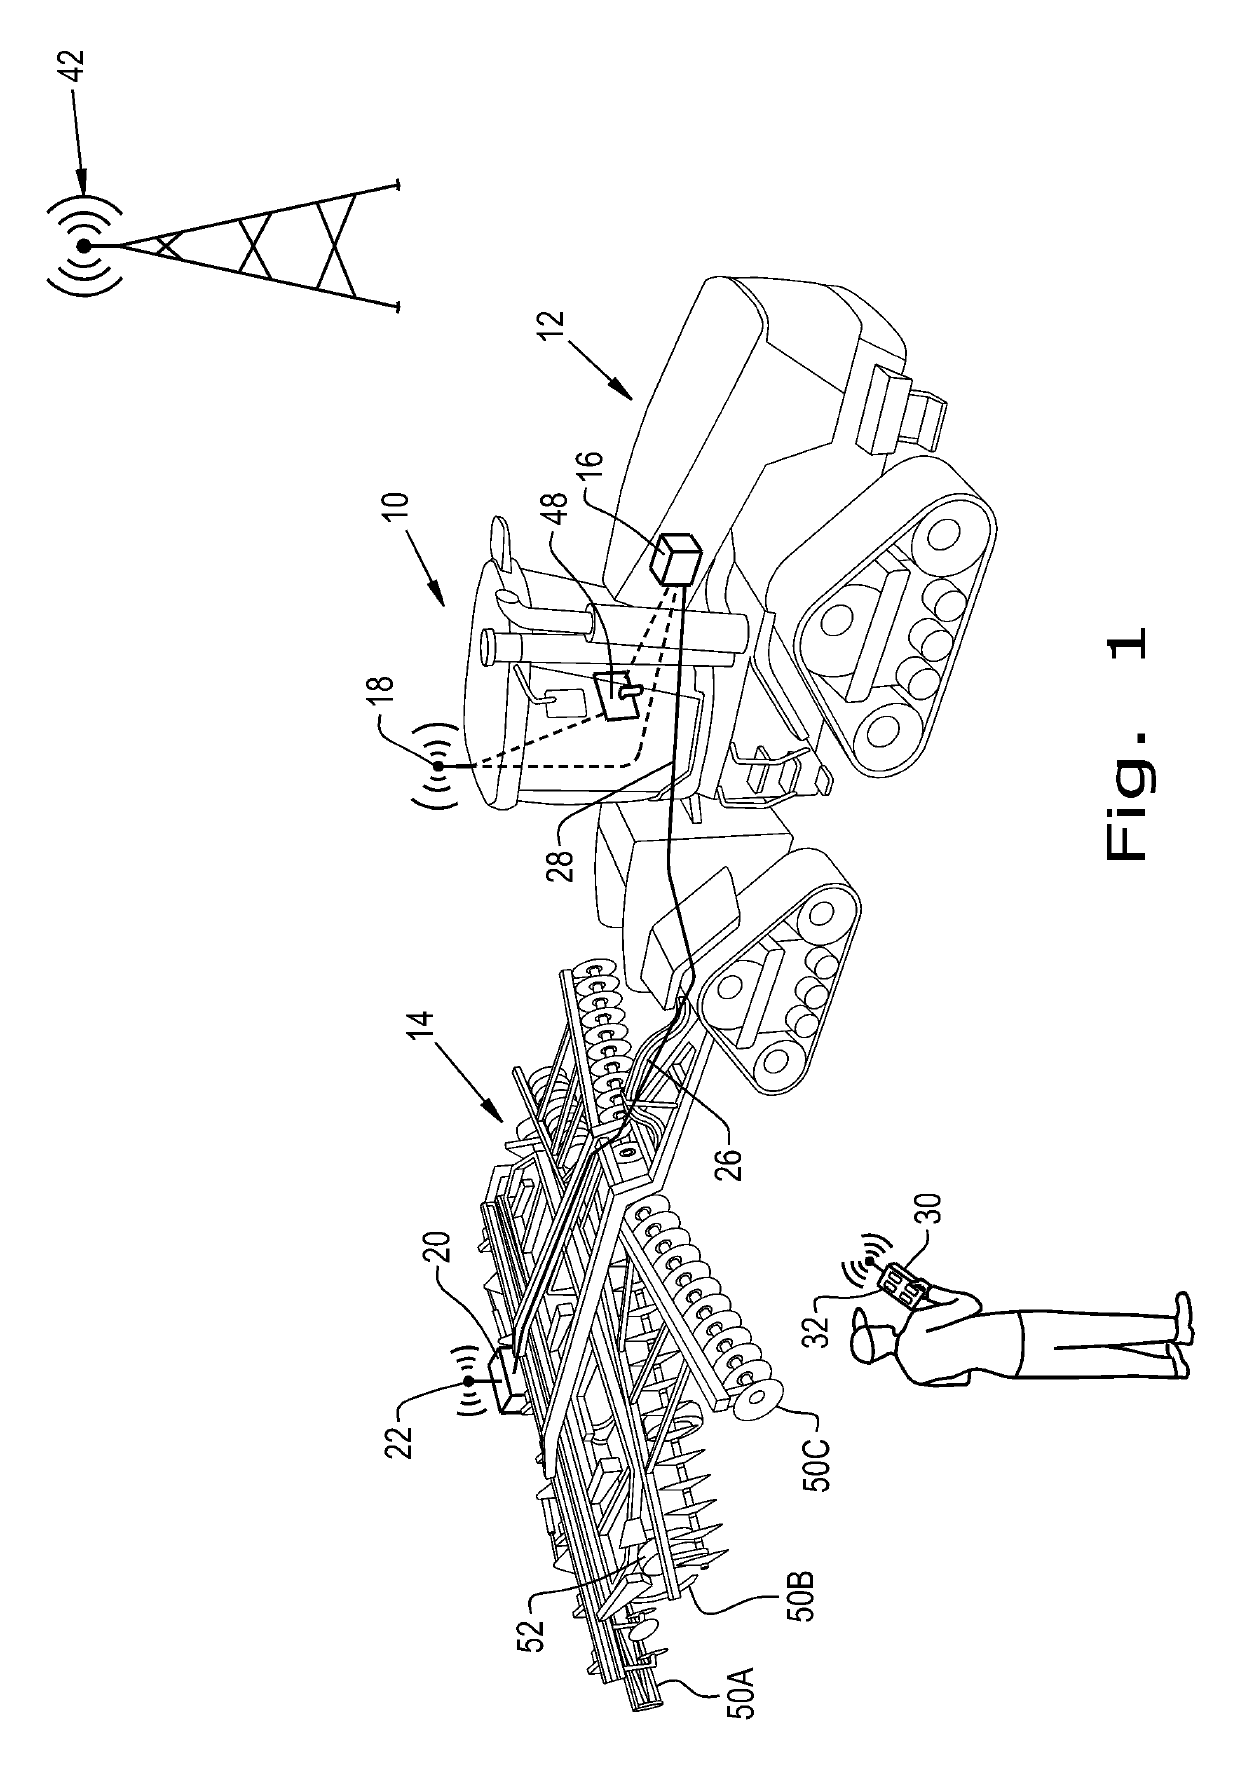 Method of adjusting tillage equipment remotely from outside a tractor cab